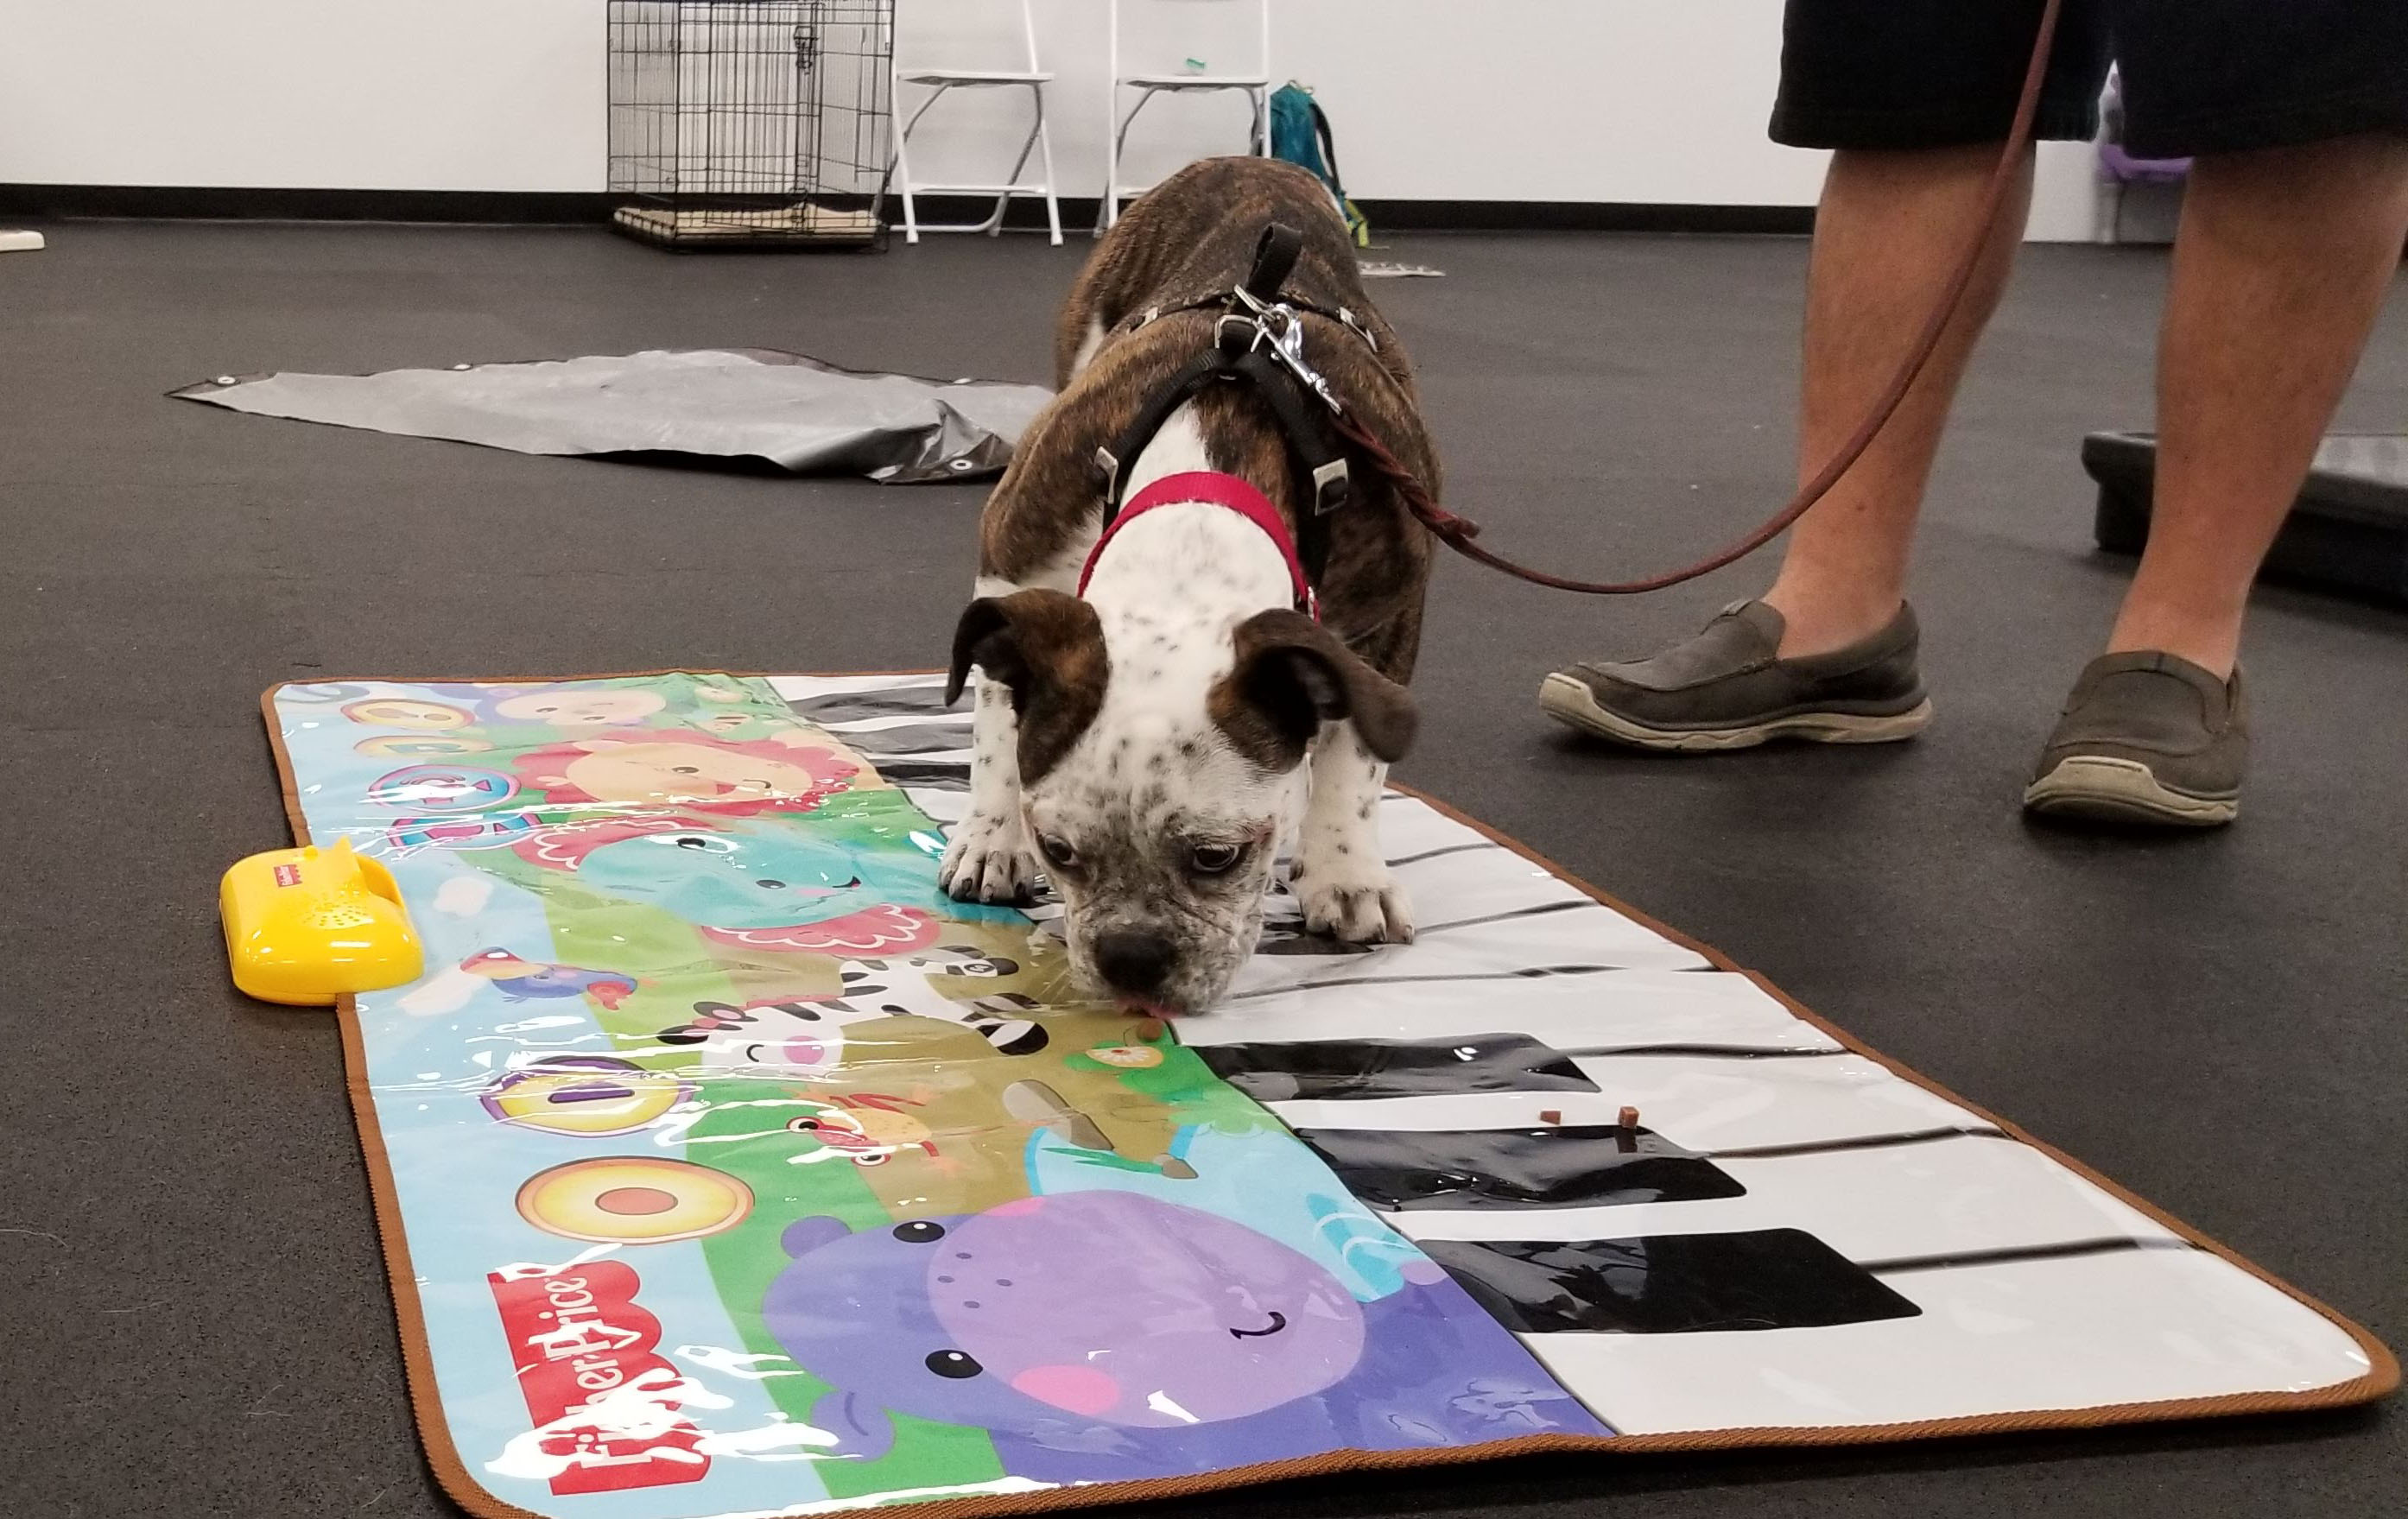 Puppy making noise walking on floor piano in class